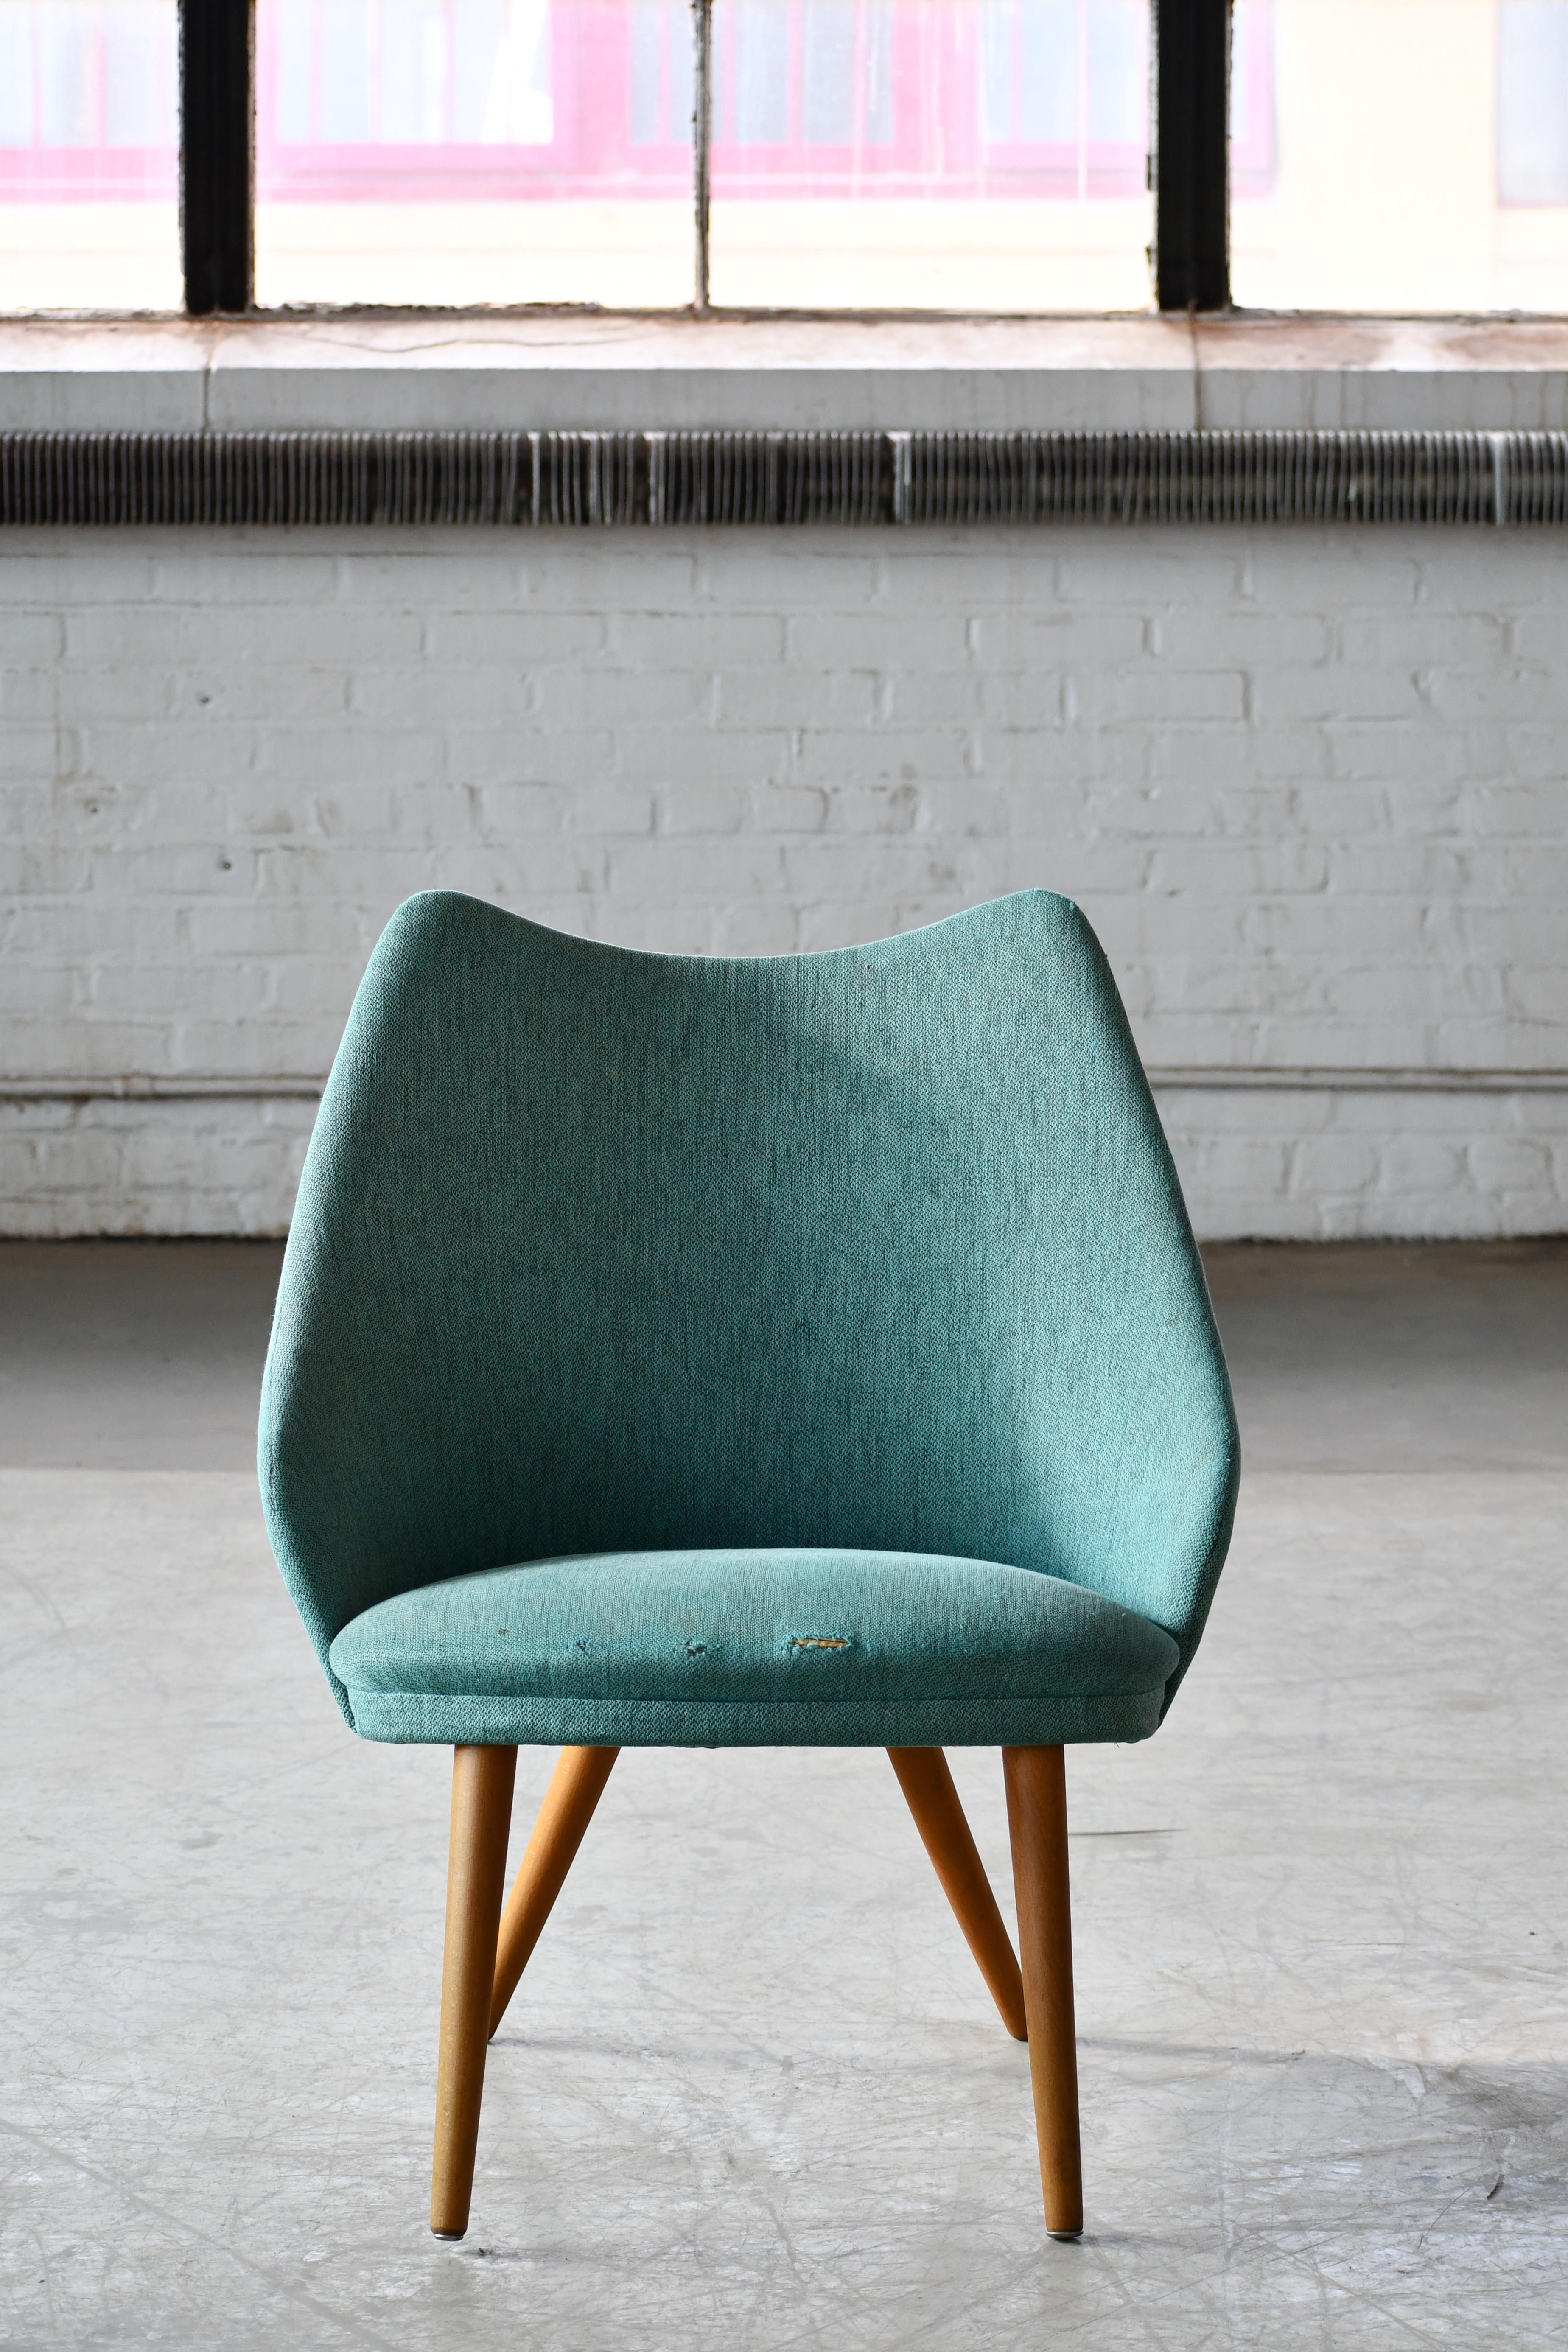 Classic small easy chair in teal wool vinyl with curved back and legs in solid teak 
very similar in design to model 301 designed by Ejvind A. Johansson for  Gotfred H. Petersen in 1958. Nice light very versatile design and easy to move around when